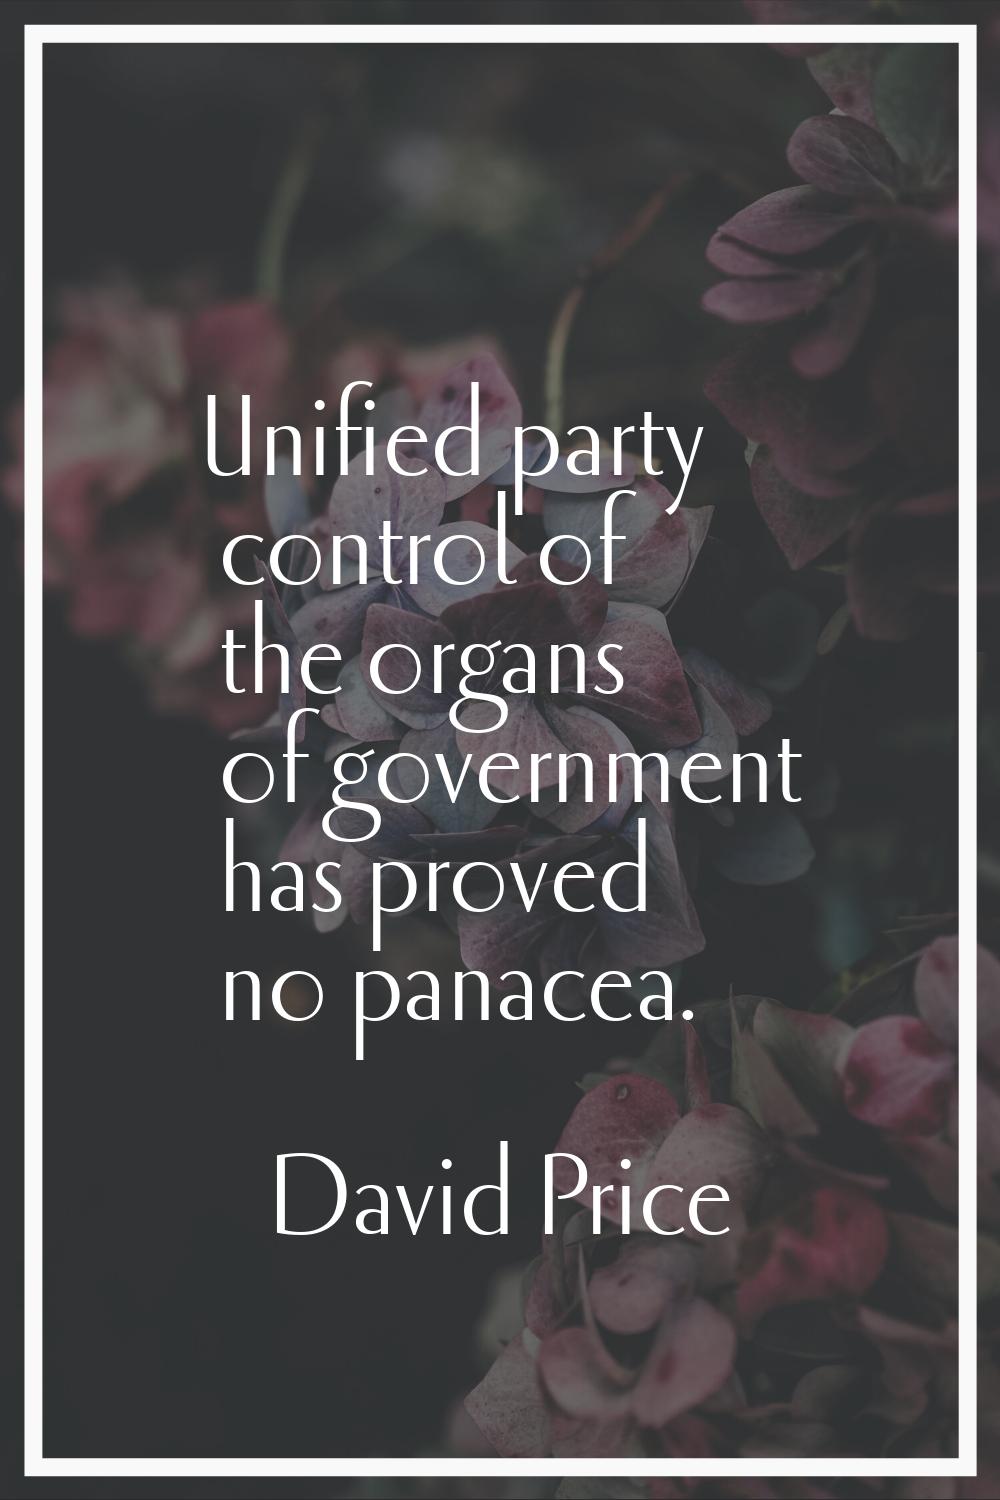 Unified party control of the organs of government has proved no panacea.